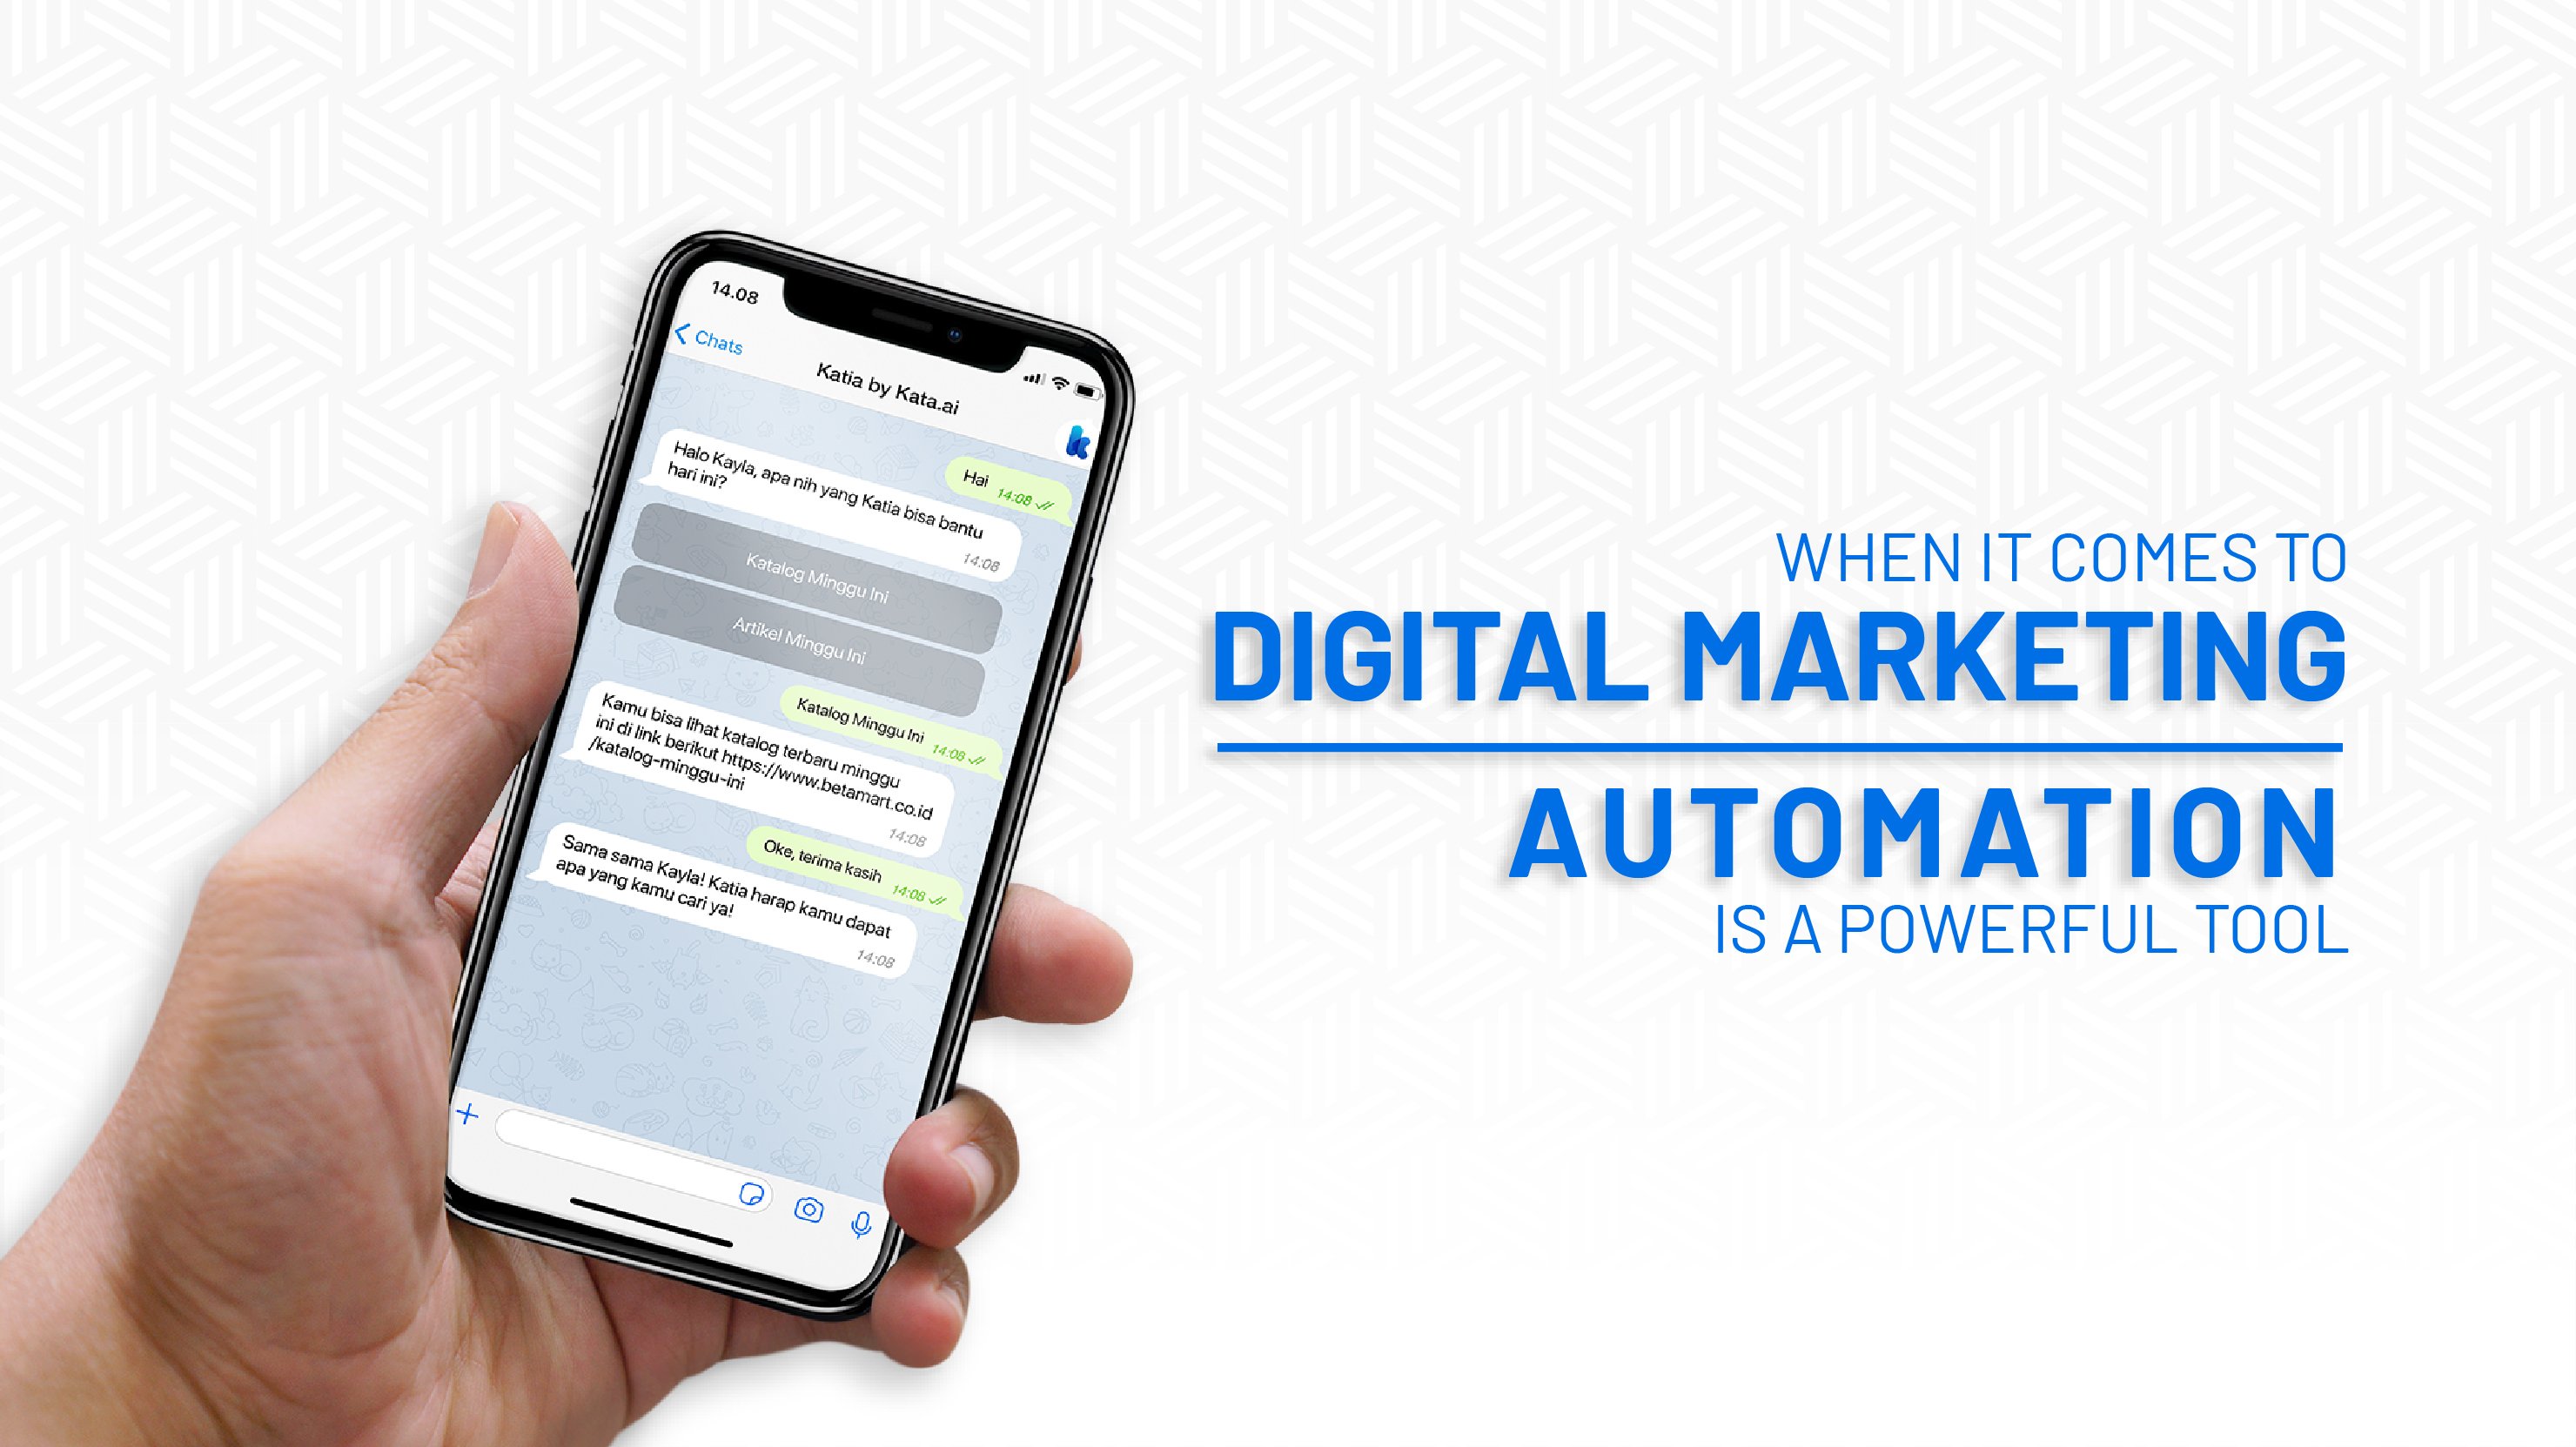 Chatbot is the key to digital marketing automation.